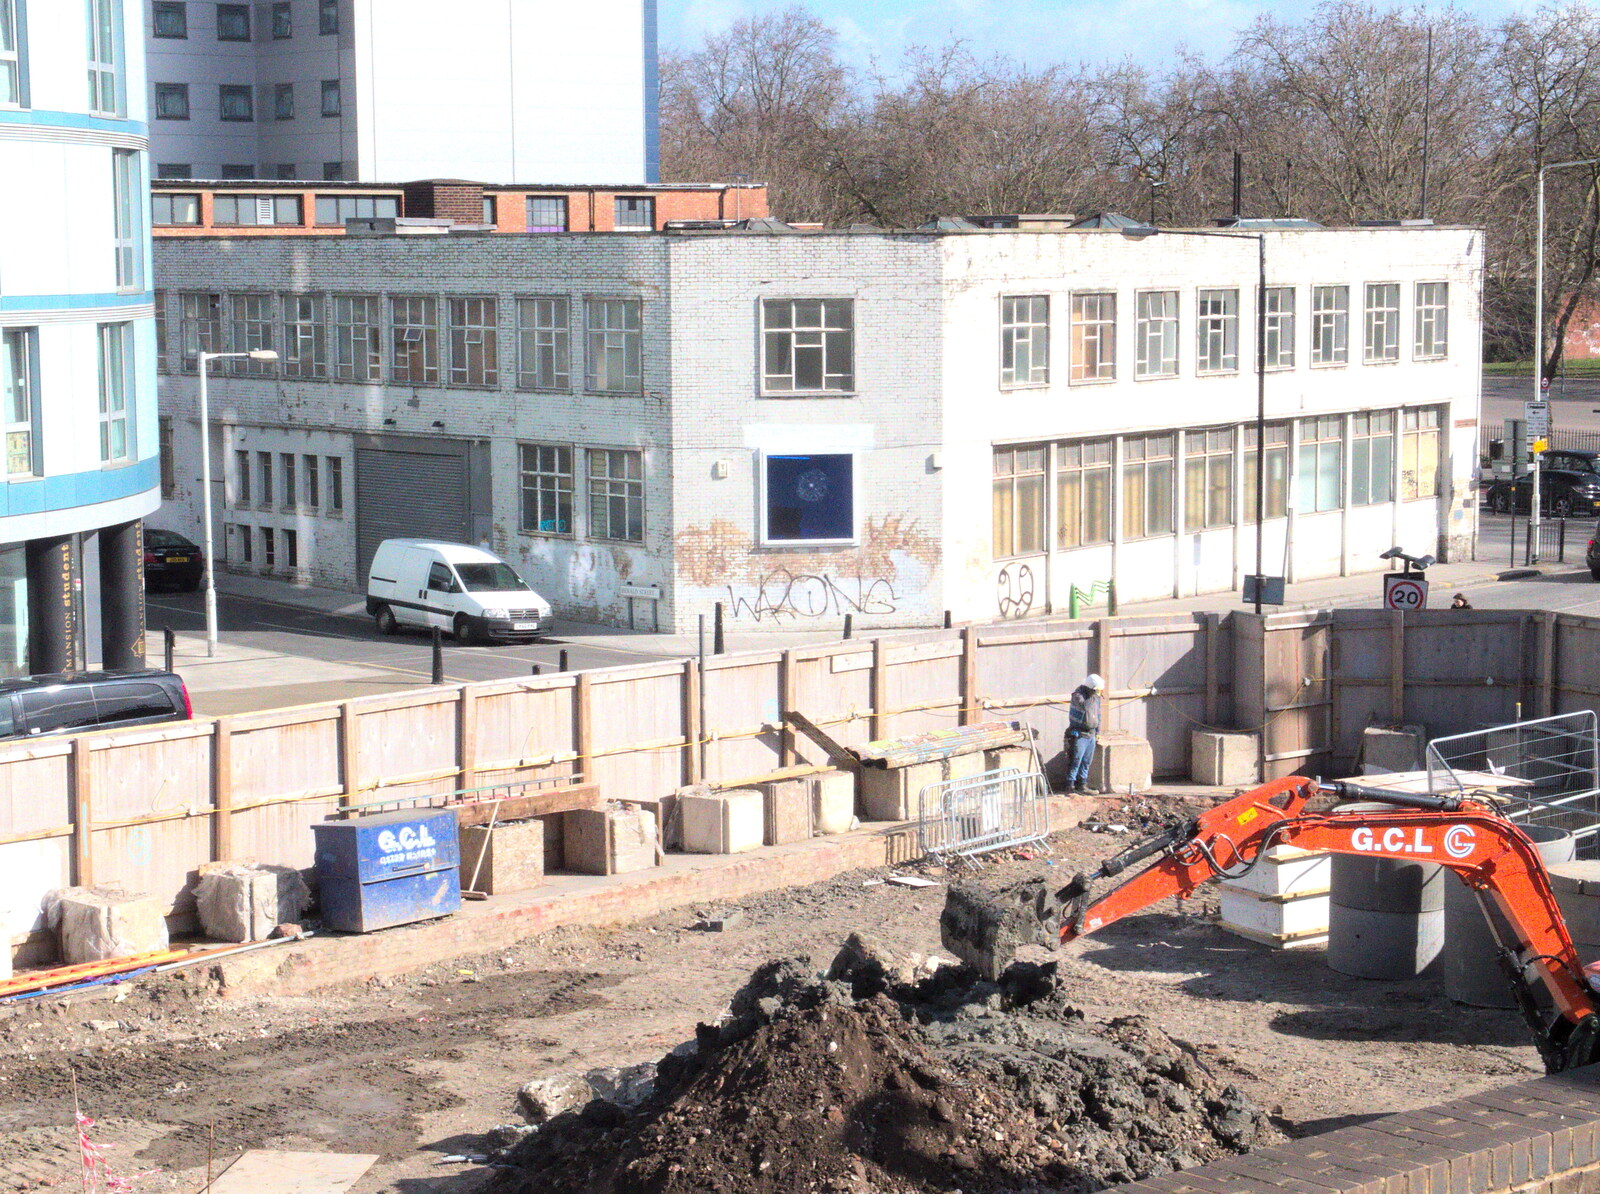 Site clearance continues in Bethnal Green from The Last Day of Pre-School and Beer at the Trowel and Hammer, Cotton, Suffolk - 29th March 2015